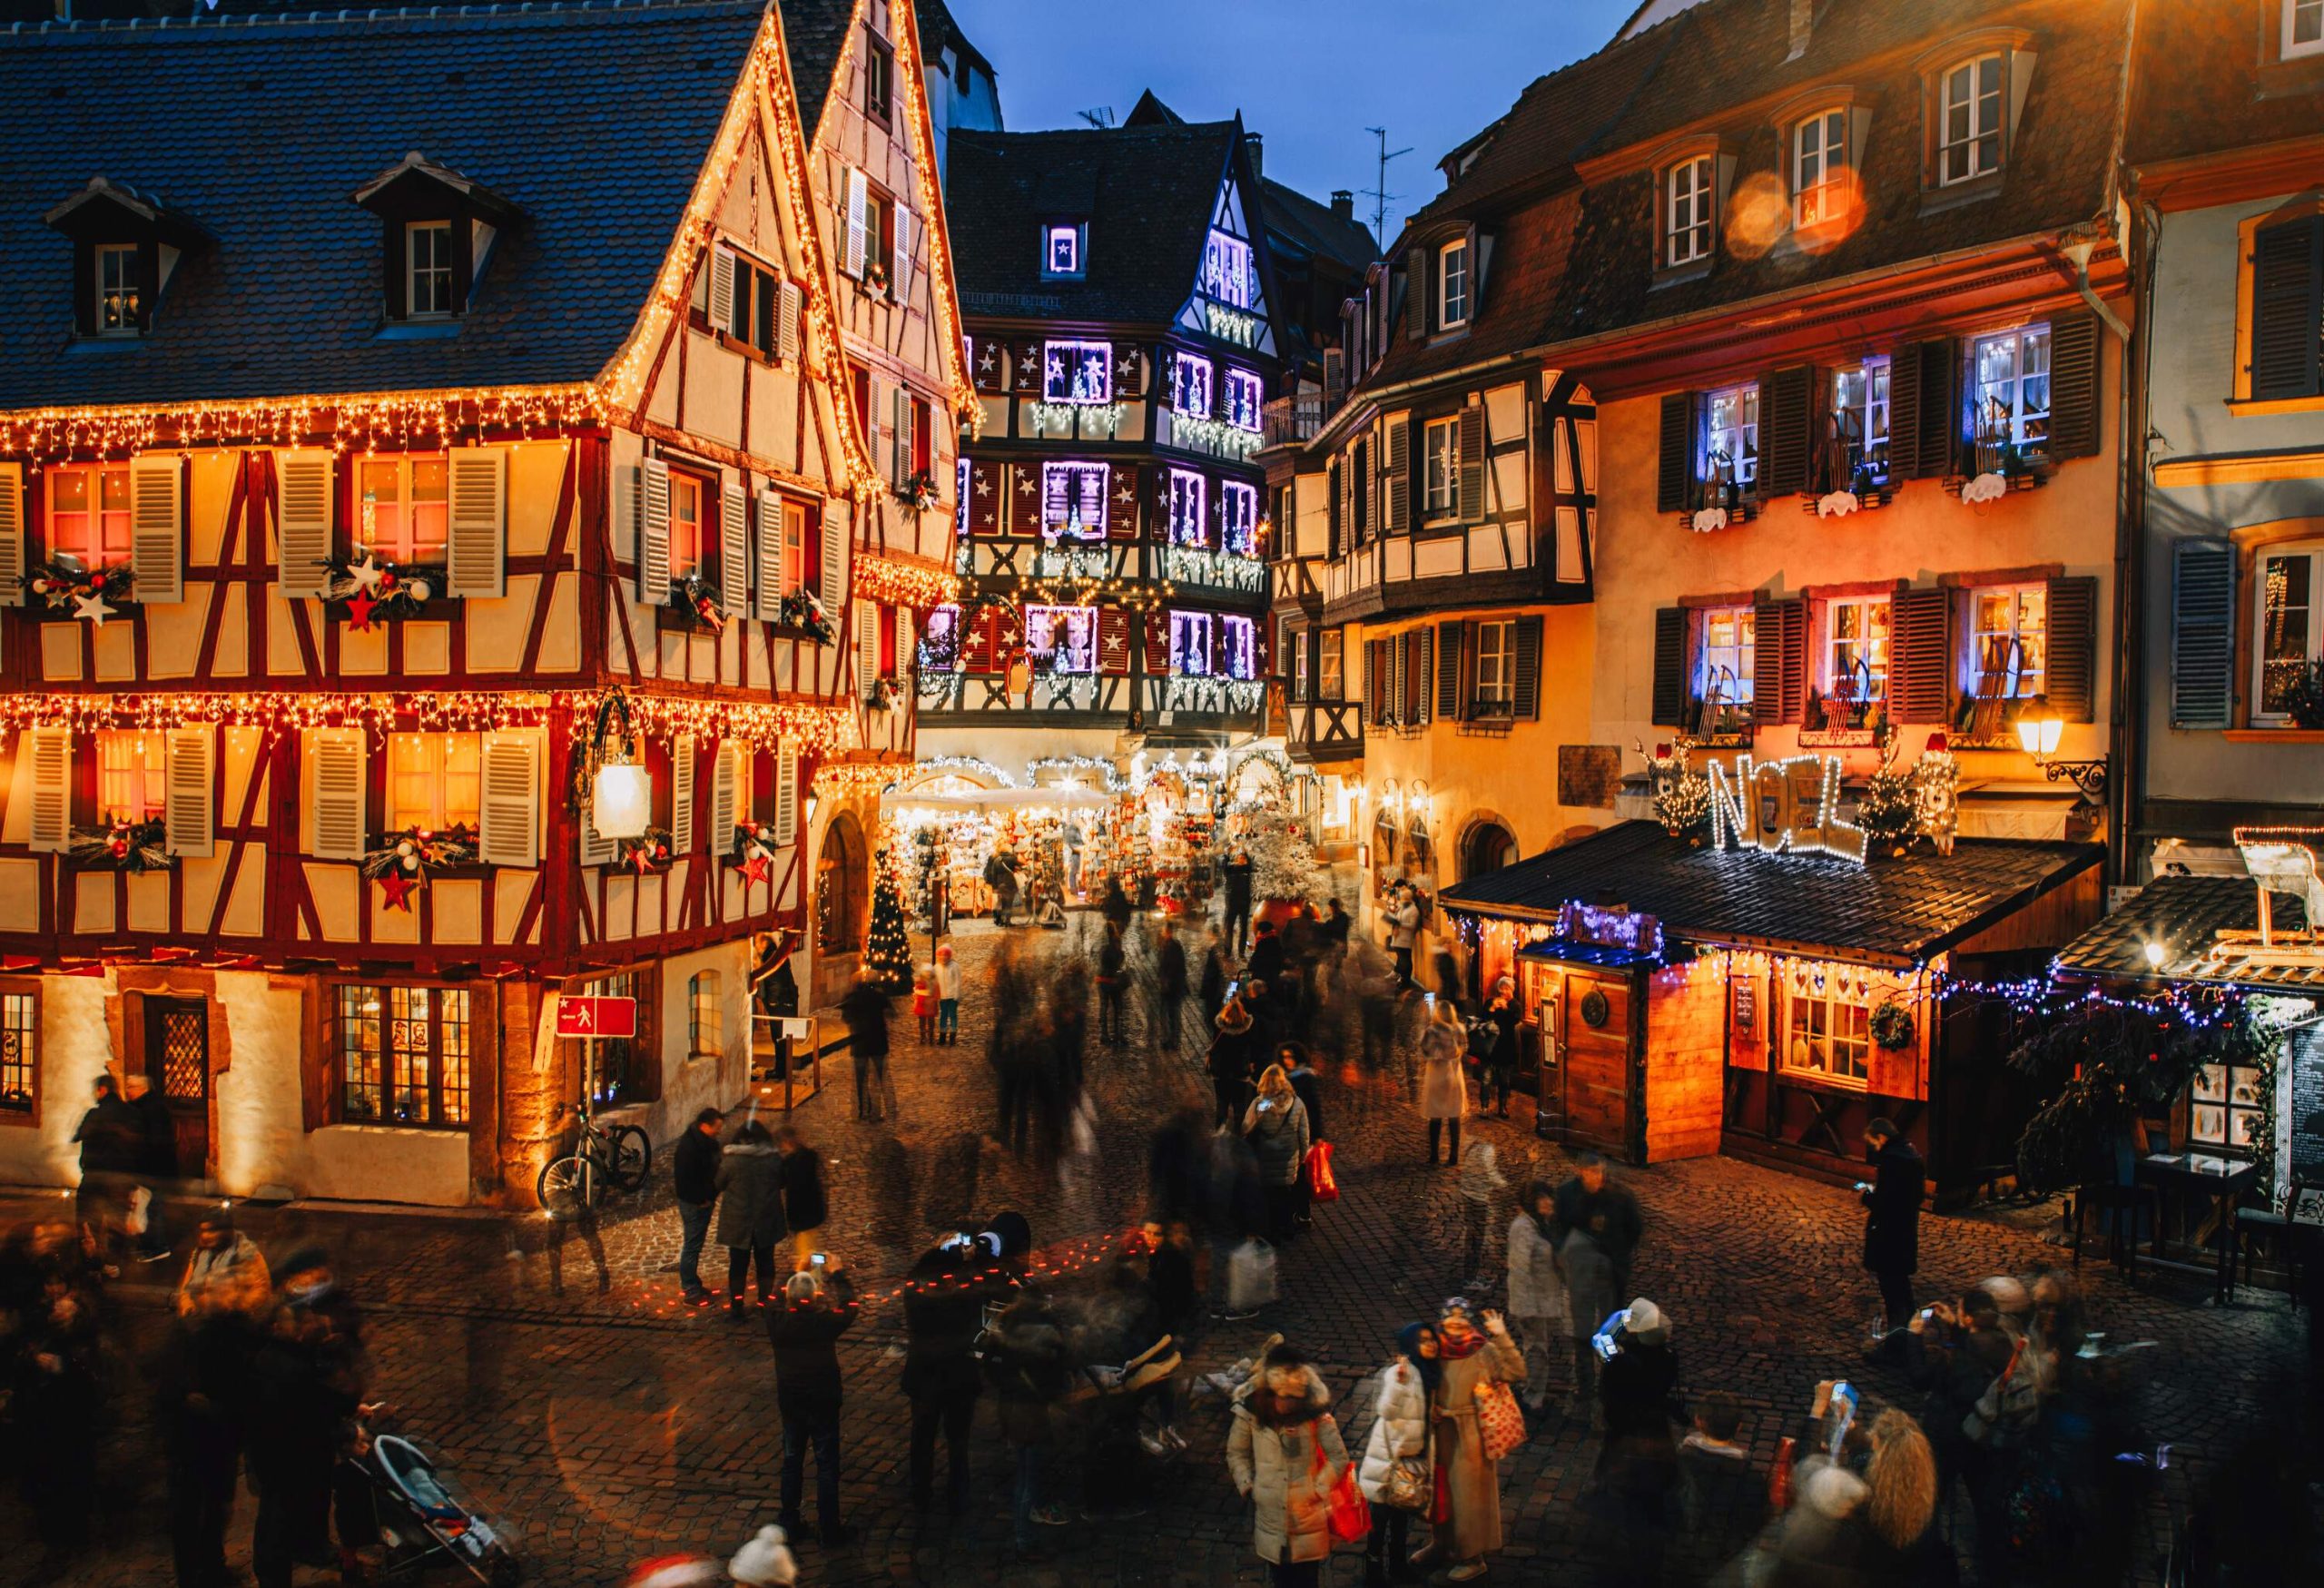 A busy street is full of crowds surrounded by half-timbered houses brightly lit with Christmas lights and decorated with various colourful Christmas ornaments.